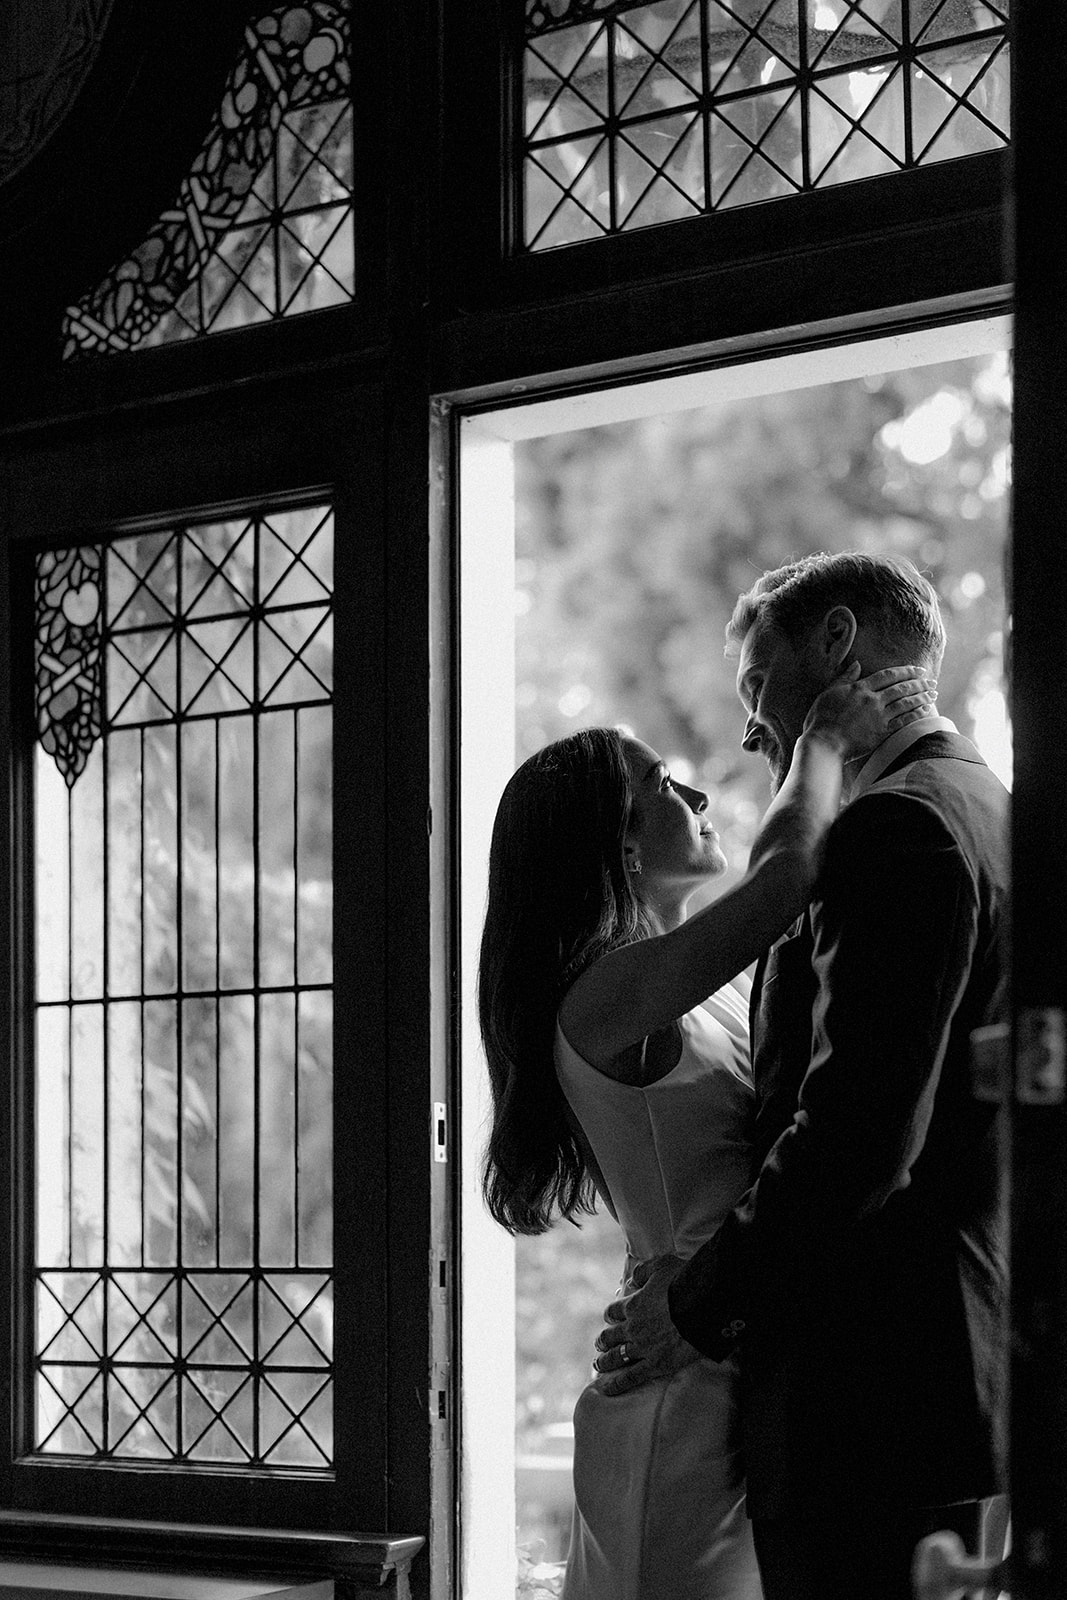 Vancouver wedding photographer captures photos of couple having their first look at Hycroft wedding